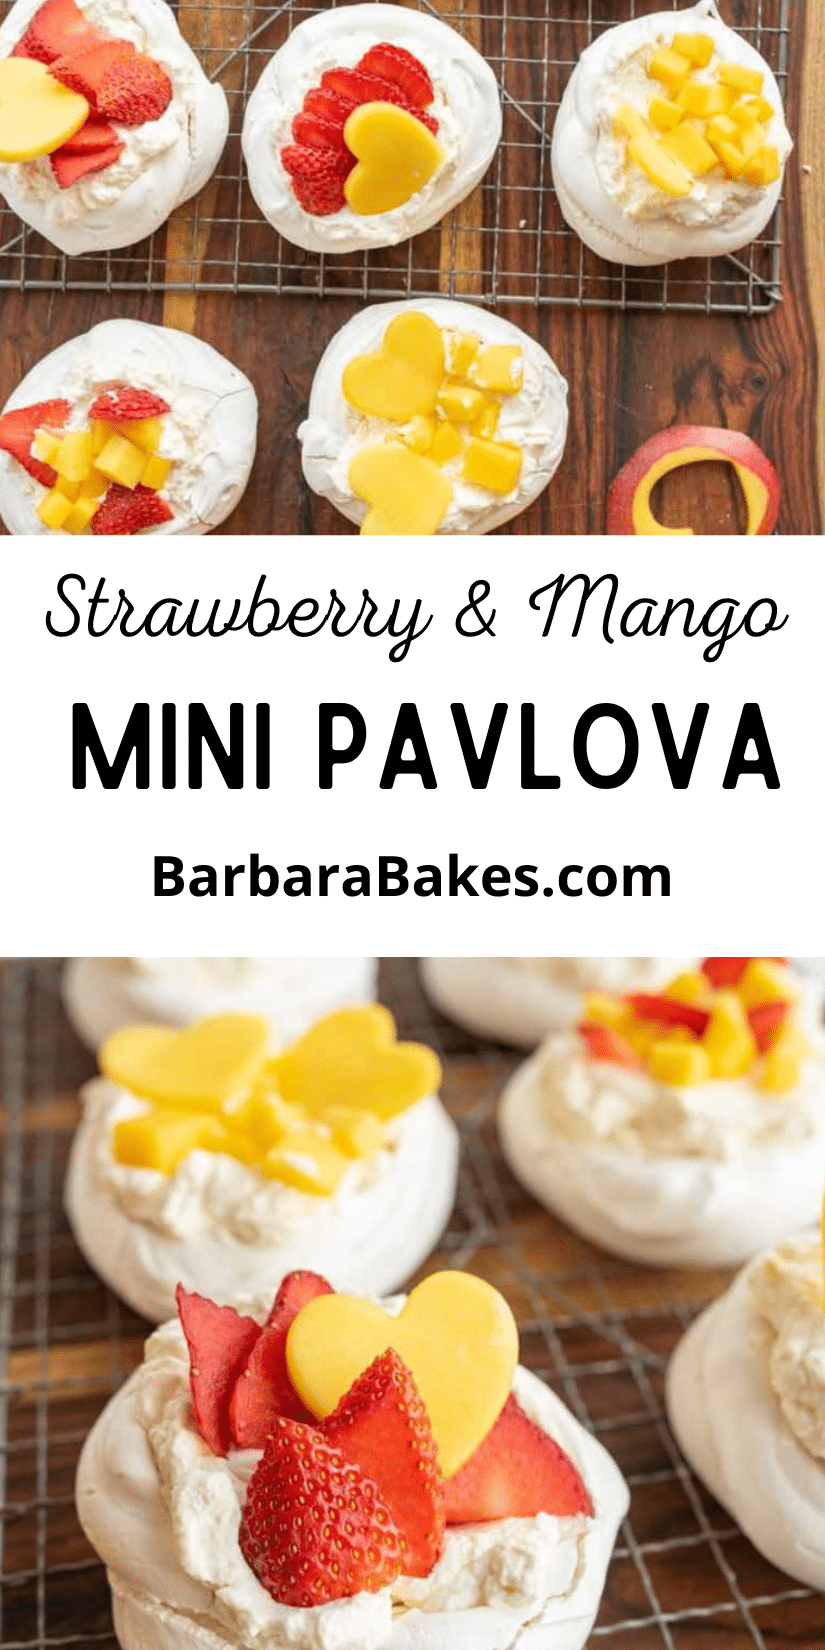 Mini Pavlova is an individual serving dessert that is beautiful, dainty and way easier to make than you think! via @barbarabakes